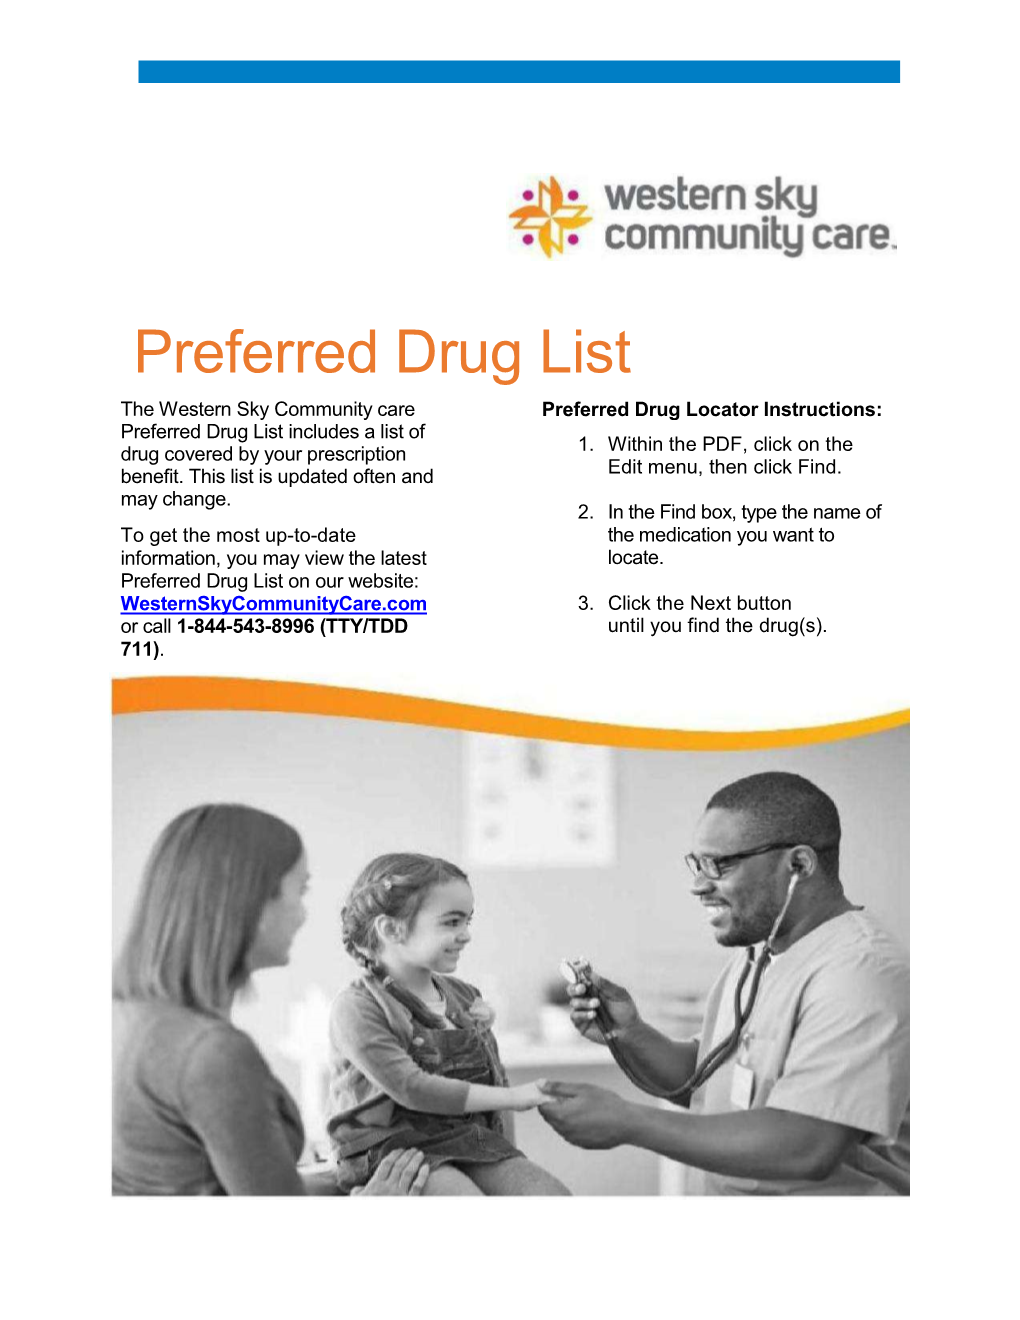 Western Sky Community Care Preferred Drug Locator Instructions: Preferred Drug List Includes a List of Drug Covered by Your Prescription 1